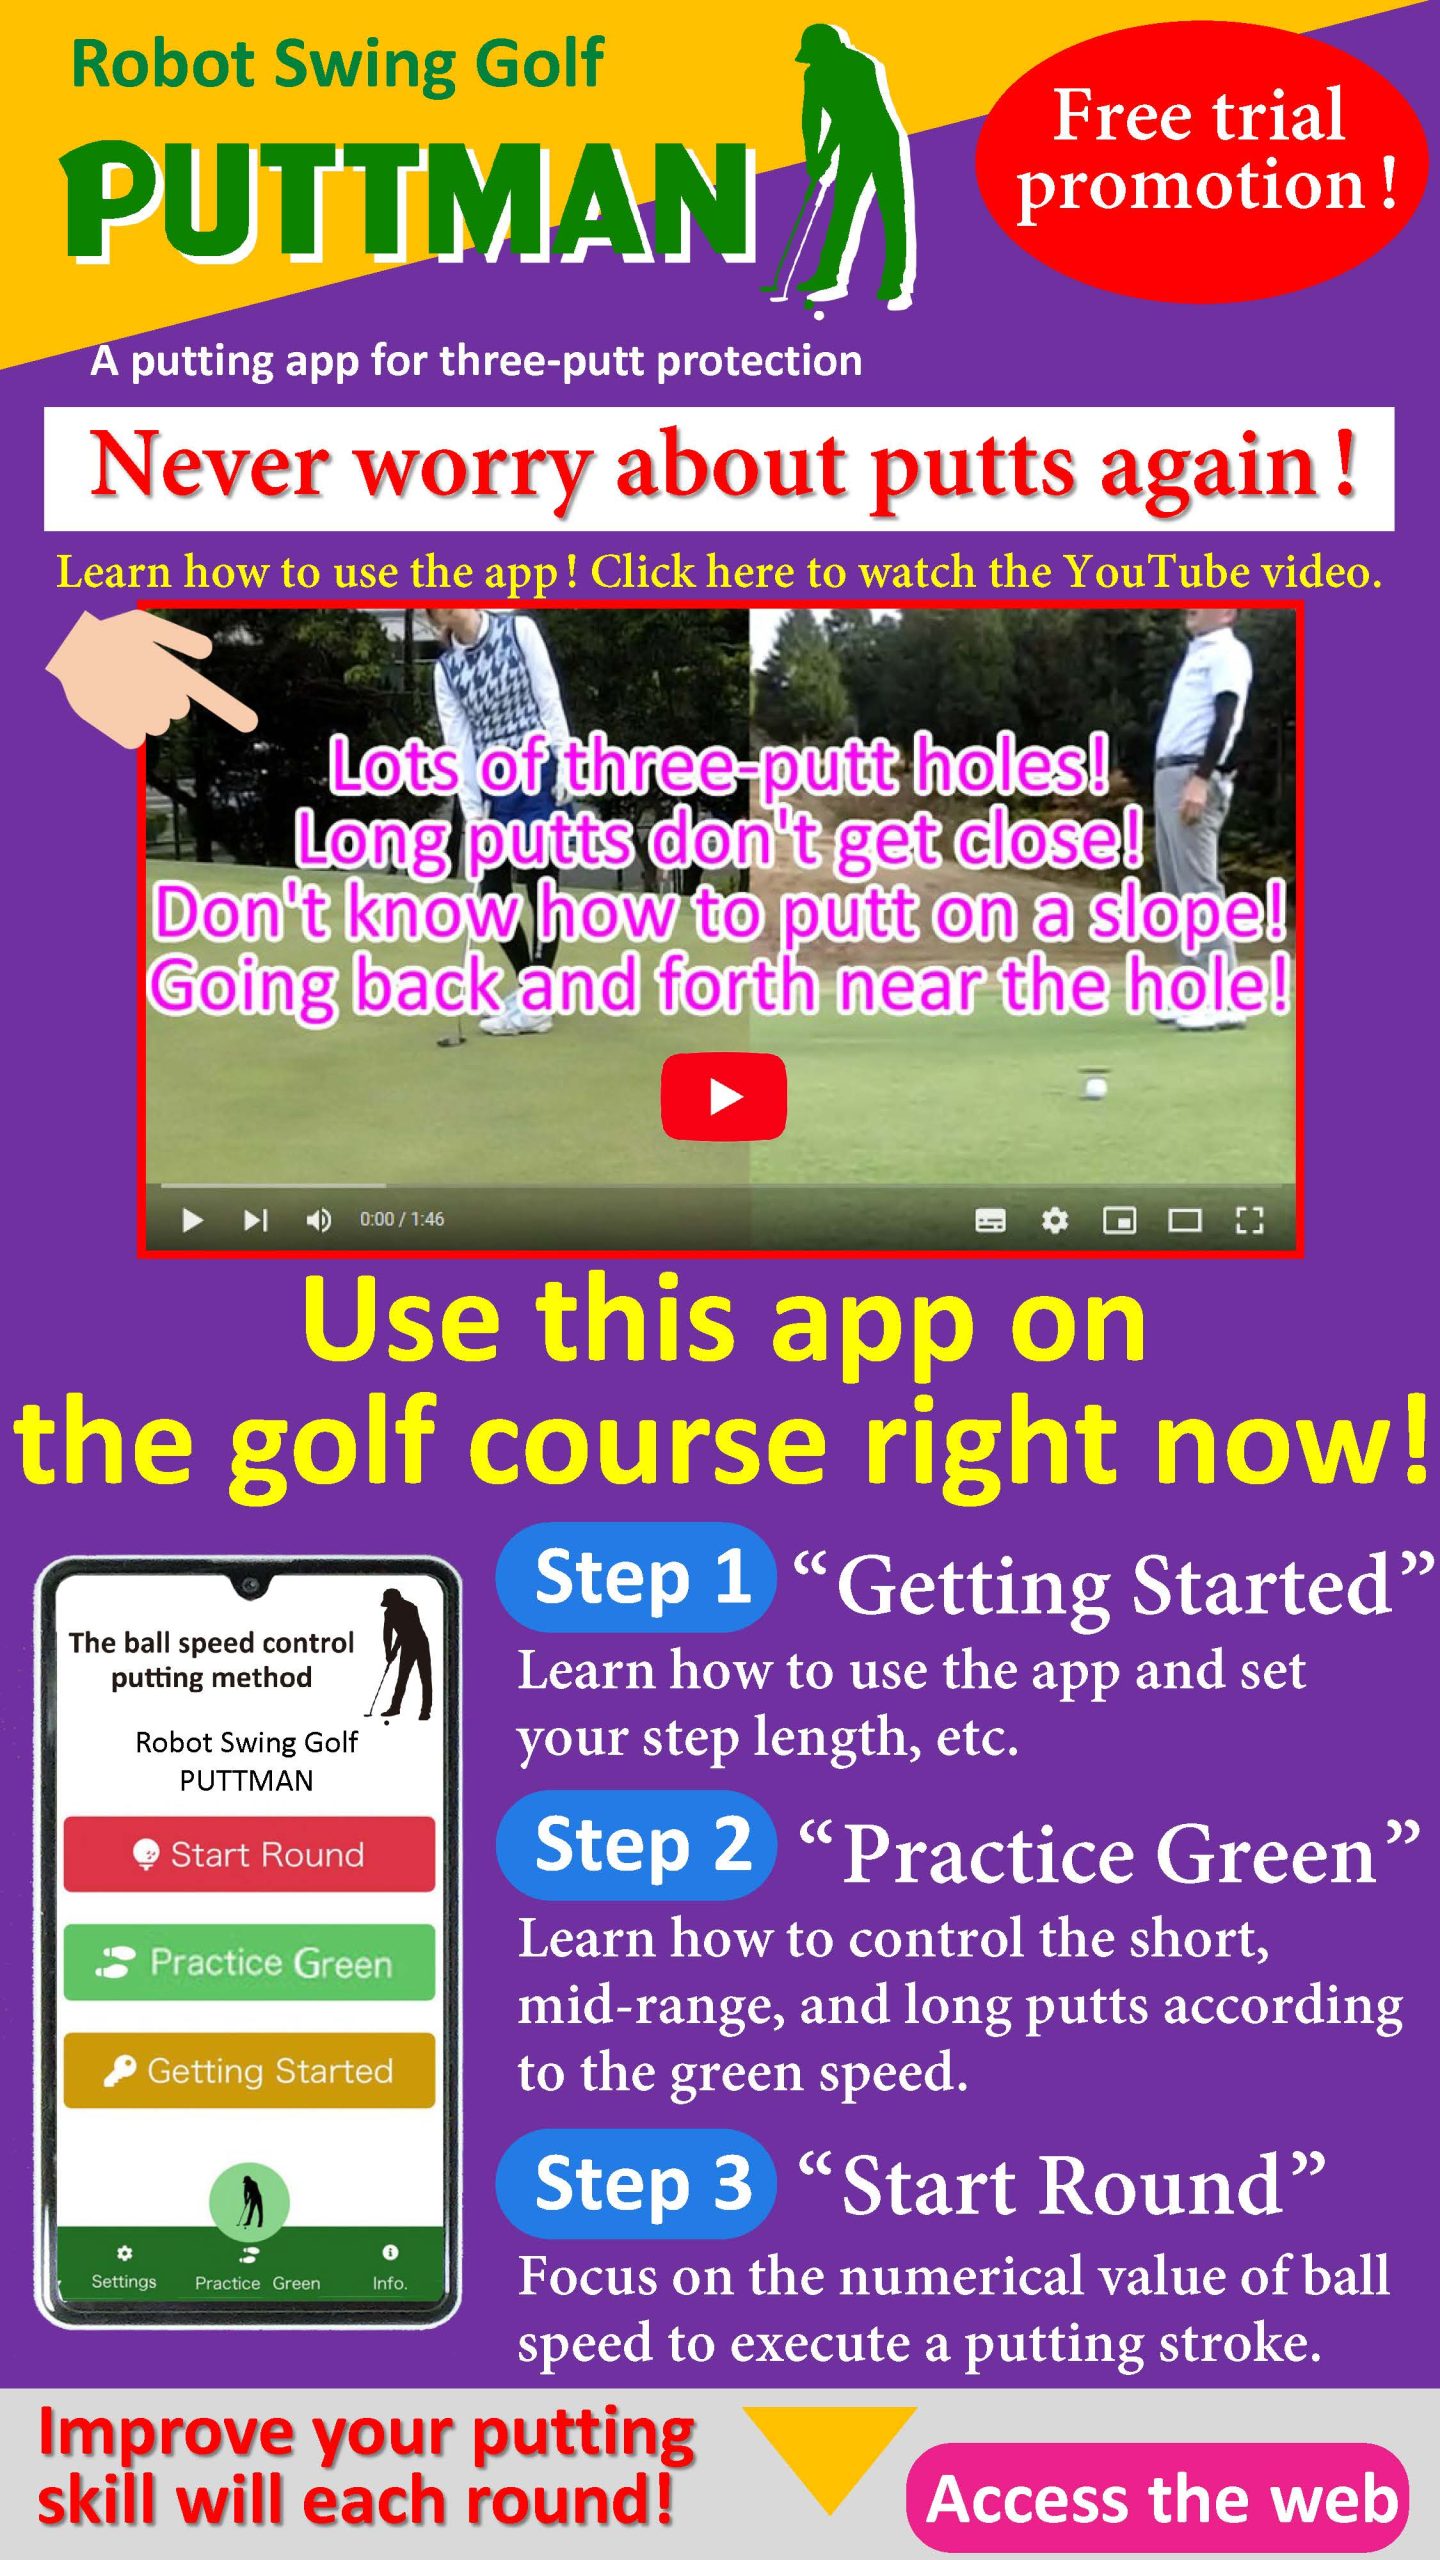 A putting app for three-putt protection. Free trial promotion! Never worry about putts again. Learn how to use the app! Click here to watch the YouTube video. Use this app on the golf course right now!Improve your putting skill will each round!Step 1“Getting Started”Learn how to use the app and set your step length, etc. Step 2“Practice Green”Learn how to do short, medium, and long putts according to the green speed.Step 3“Start Round”Focus on the numerical value of ball speed to execute a putting stroke.